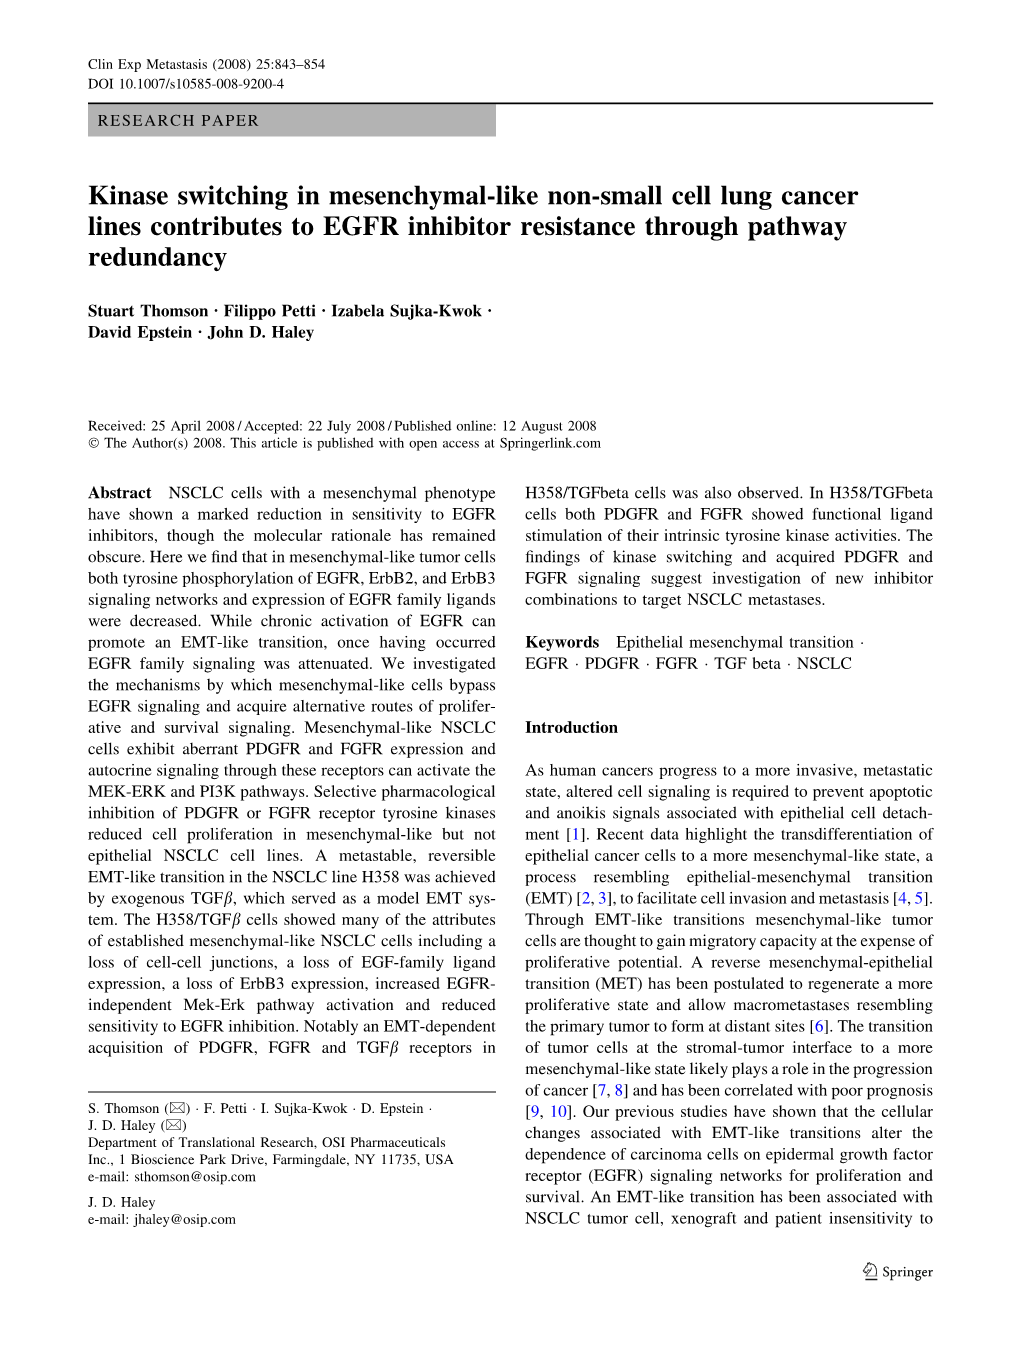 Kinase Switching in Mesenchymal-Like Non-Small Cell Lung Cancer Lines Contributes to EGFR Inhibitor Resistance Through Pathway Redundancy